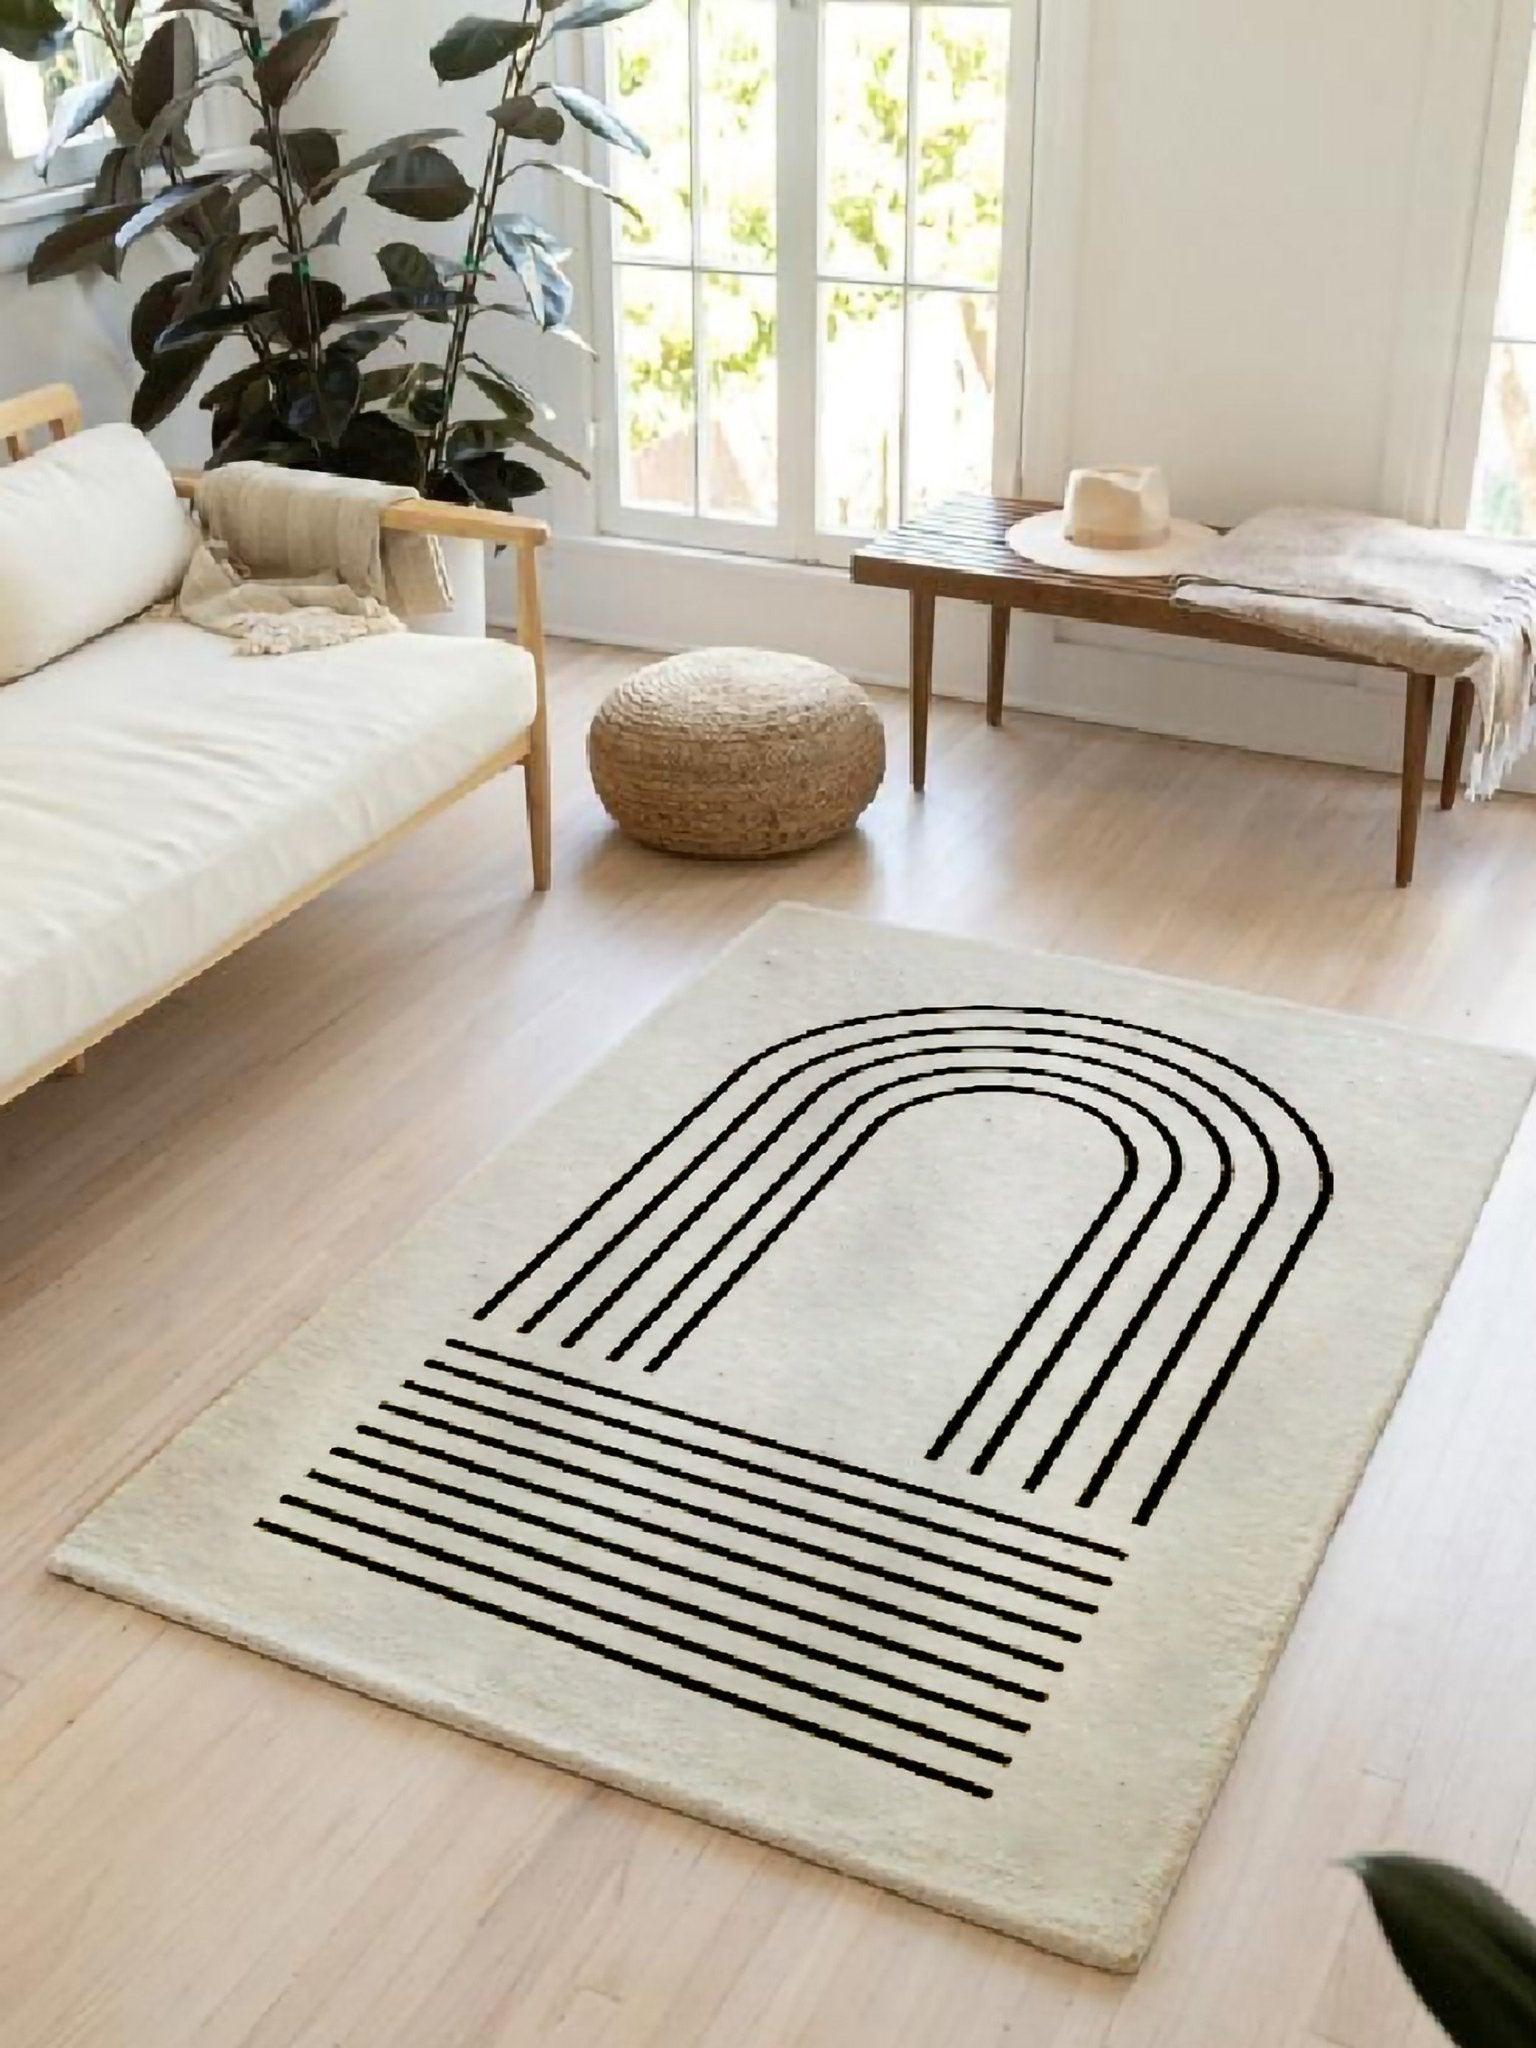 Modern Boho Line Art Carpet │ Geometric Abstract Luxury Soft Rugs │ For Living Room Bedroom Decor - Besontique